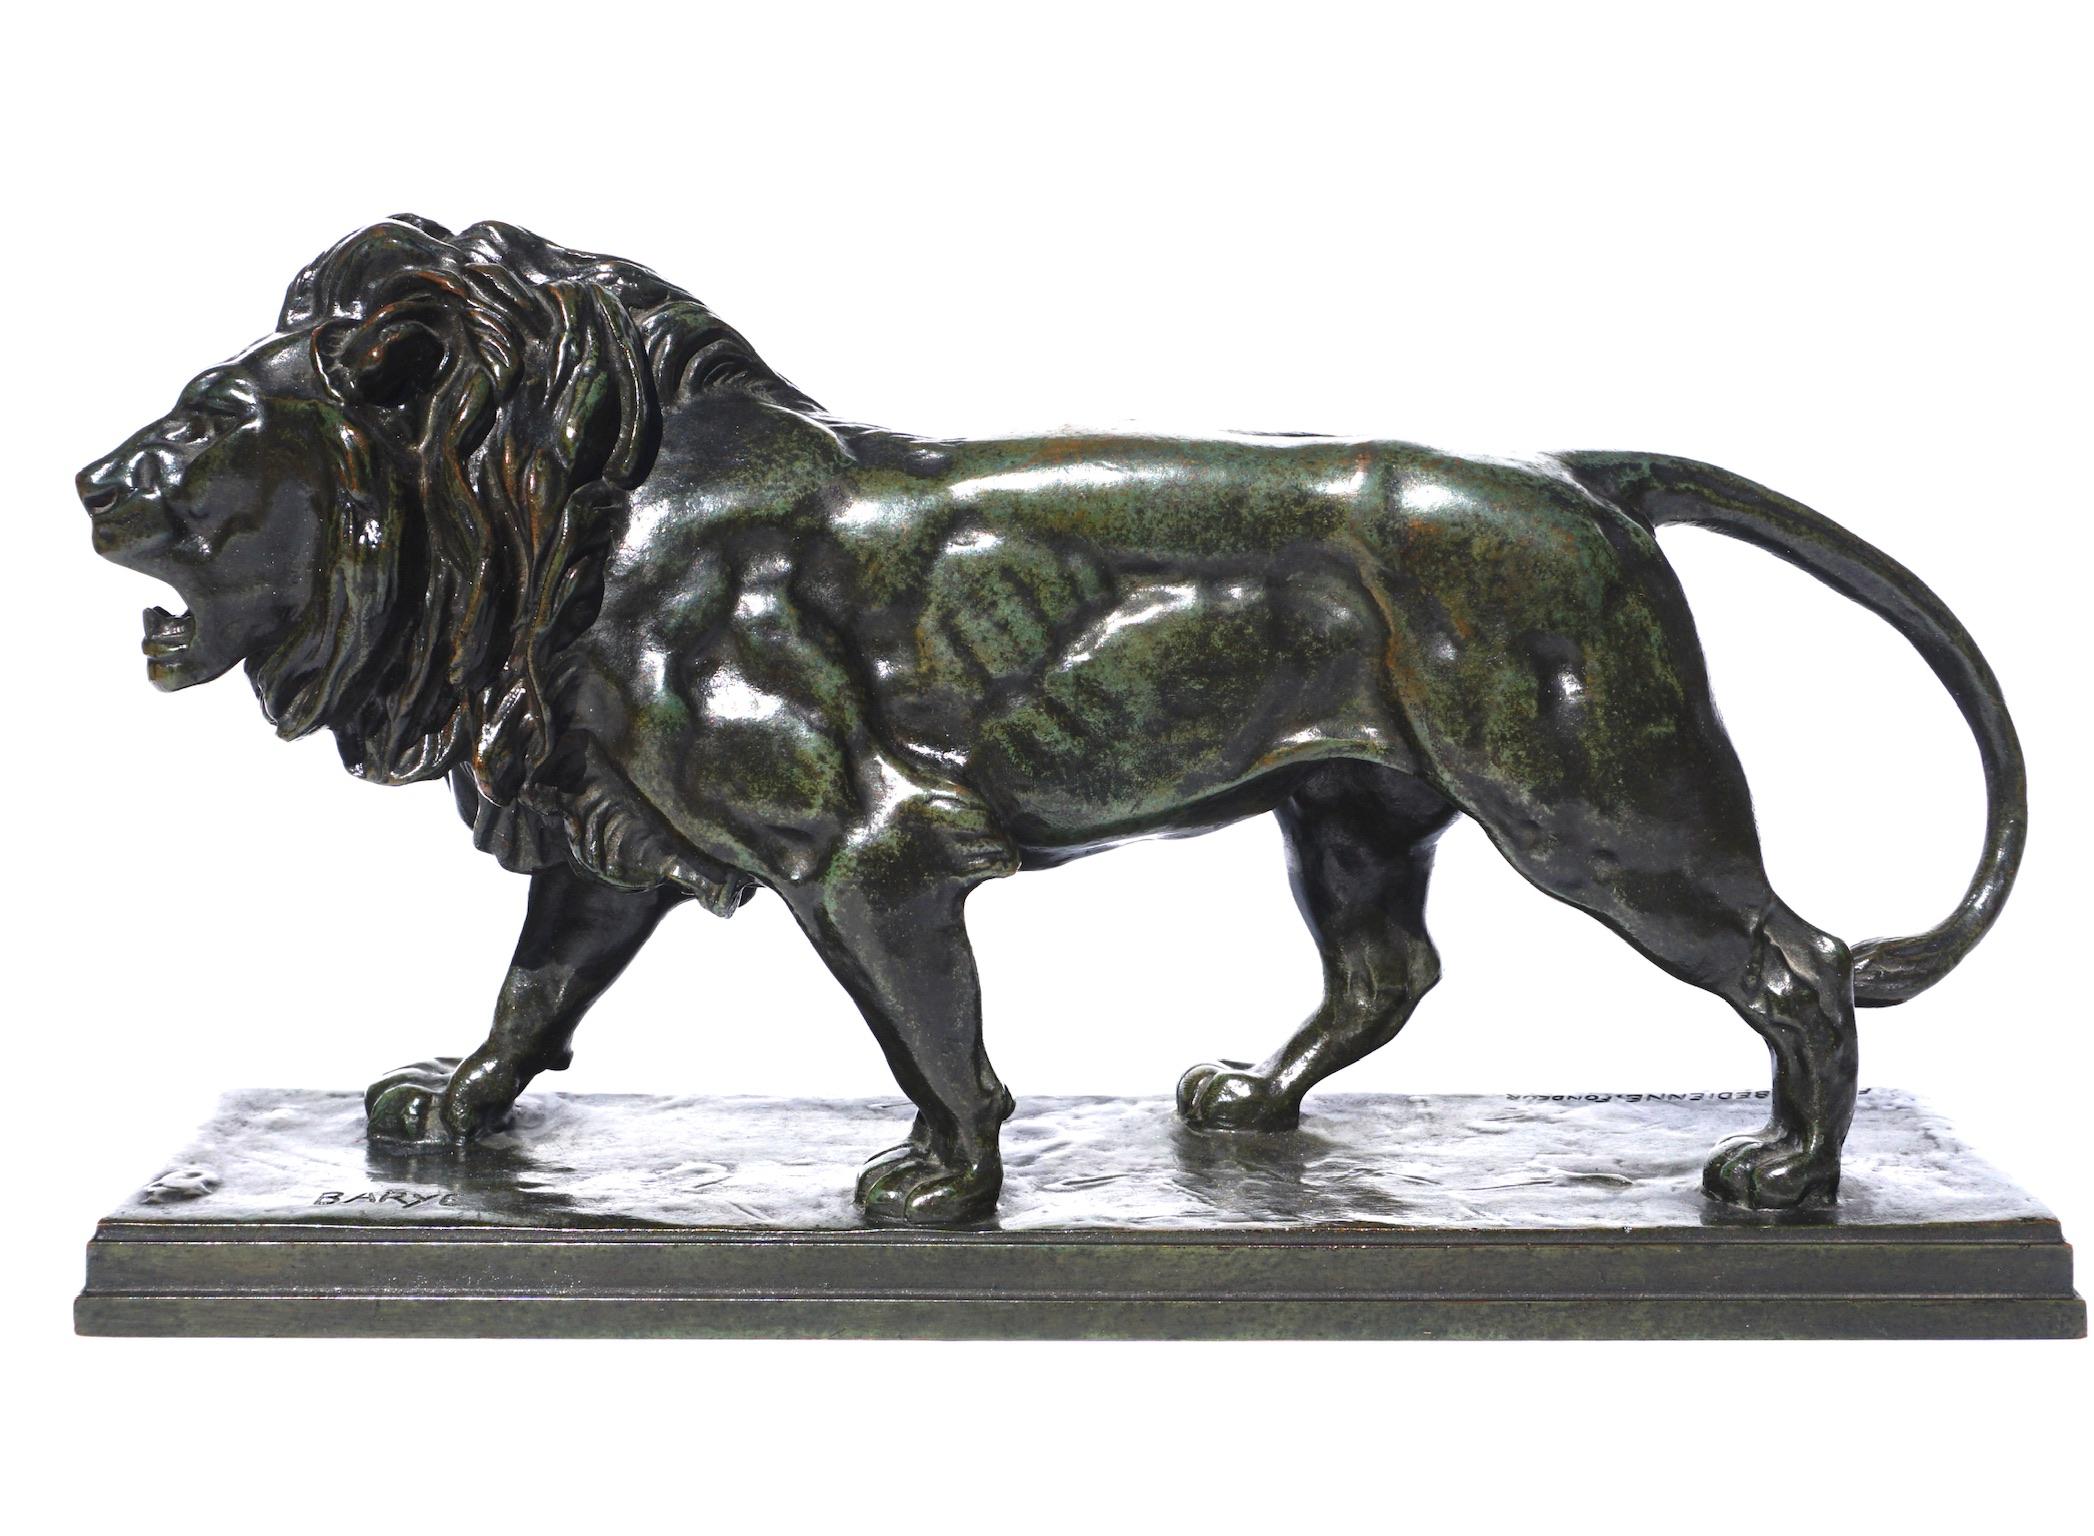 Antoine-Louis Barye (French, 1796-1875) bronze striding lion, F Barbedienne Fondeur foundry, circa 1880. Patinated brown and green patina.

Barye is best known for his bronzes of the big cats and the Striding Lion is one of his best Lion